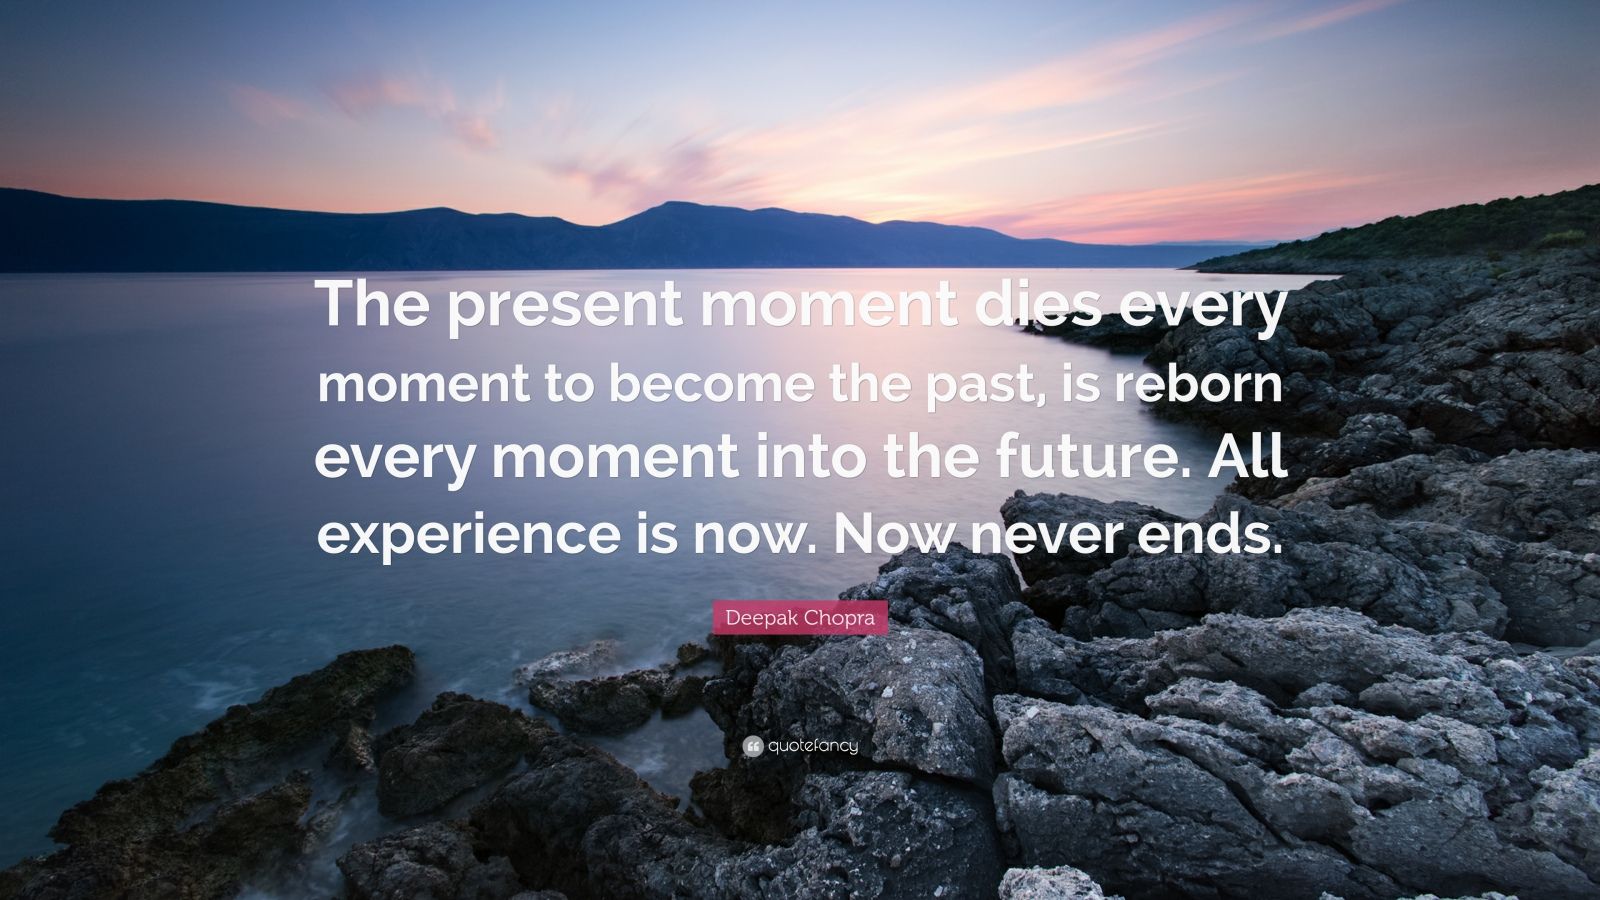 Deepak Chopra Quote: “The present moment dies every moment to become ...